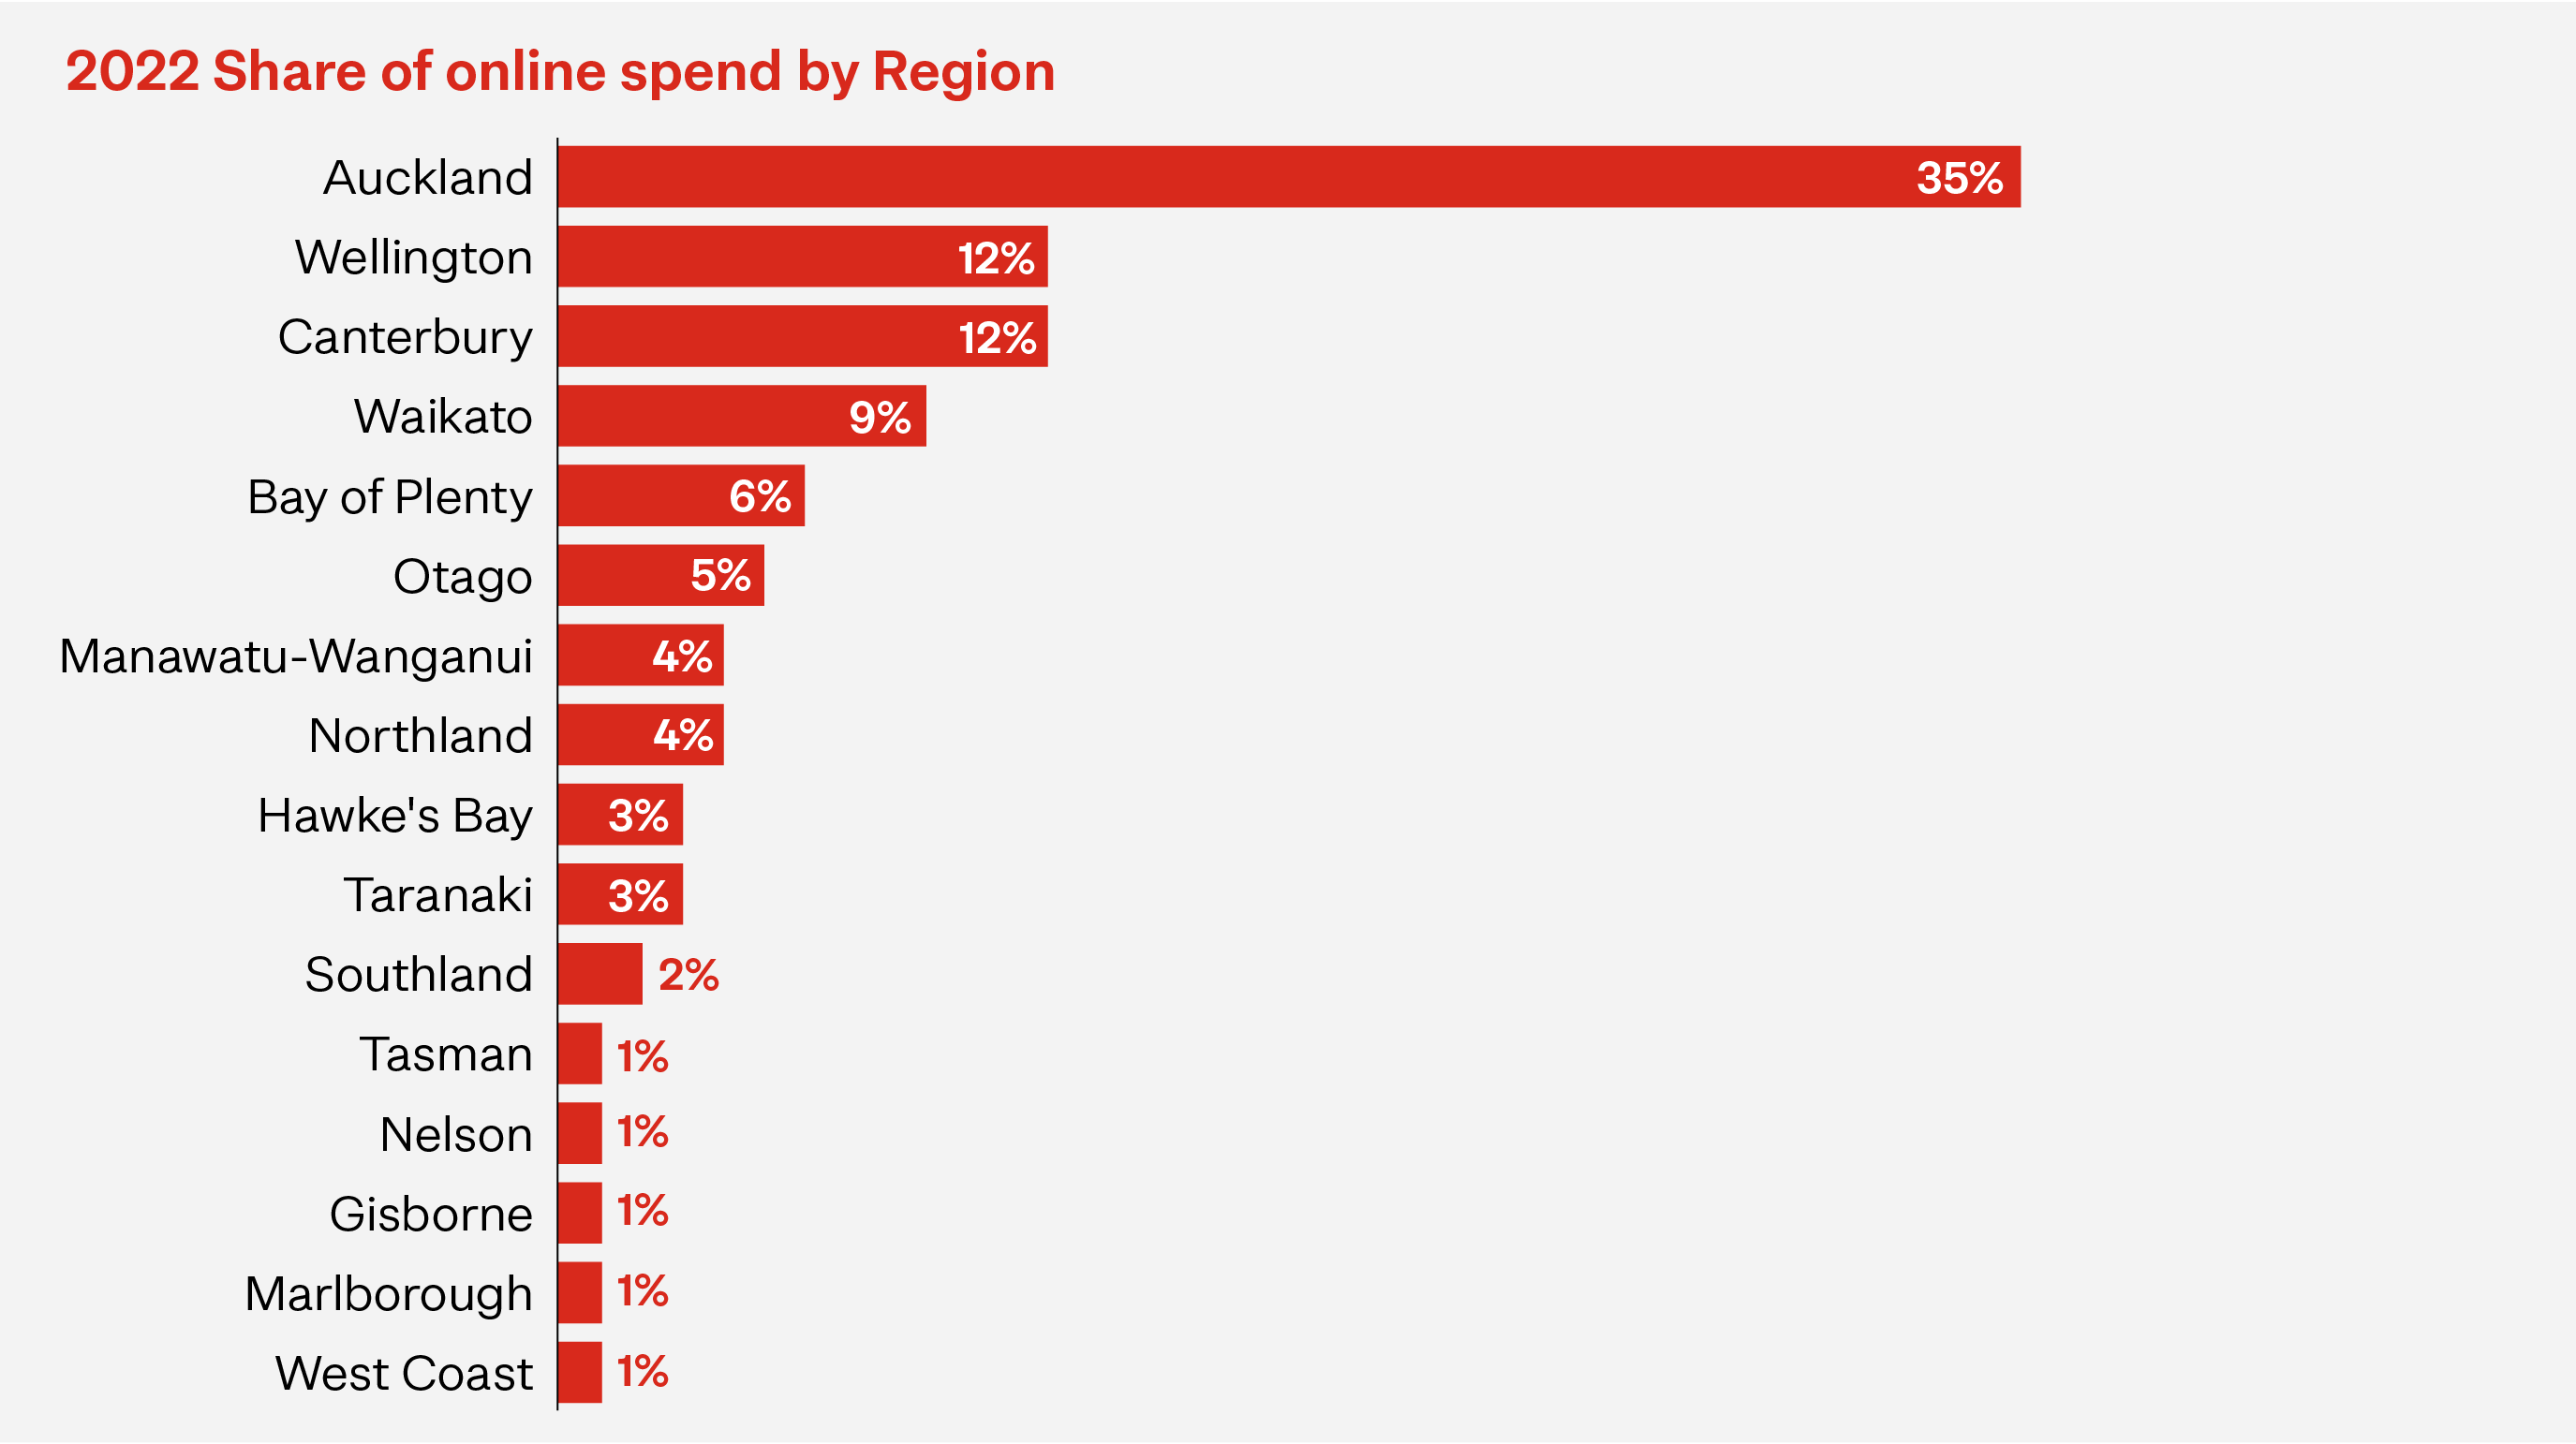 Graph showing 2022 share of online spend by region in NZ